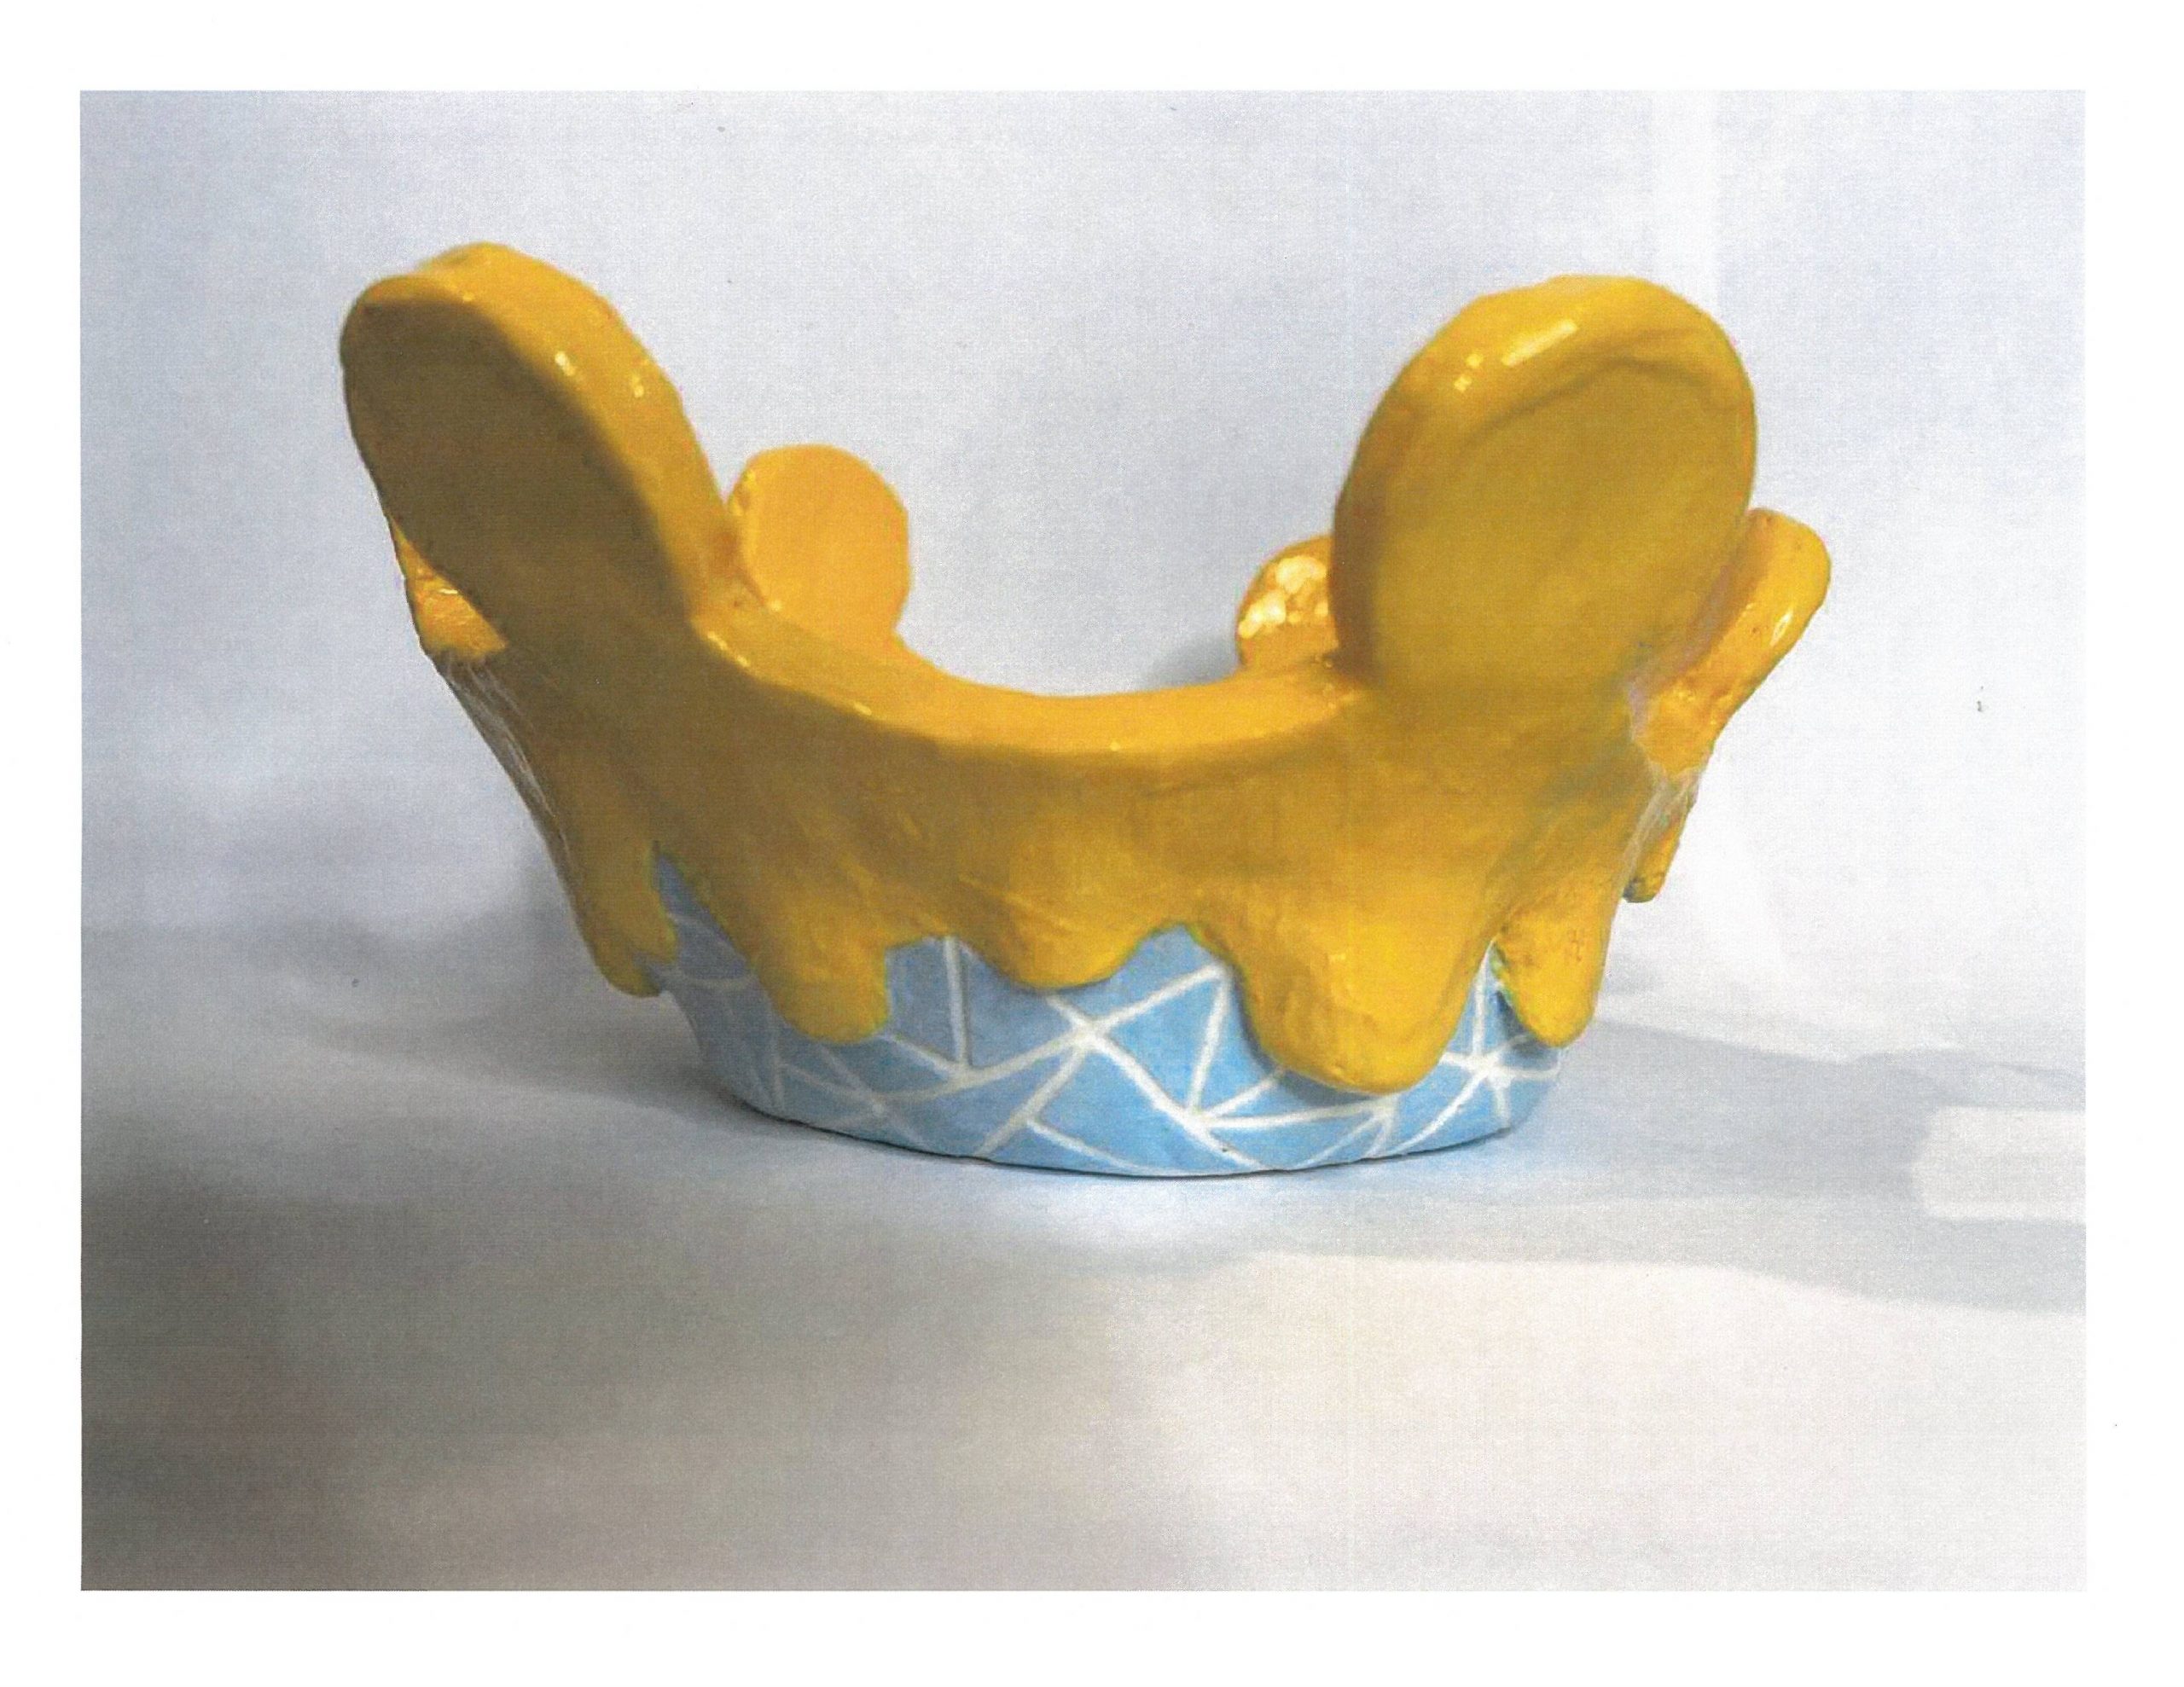 Ceramic of blue crown dripping in yellow slime.